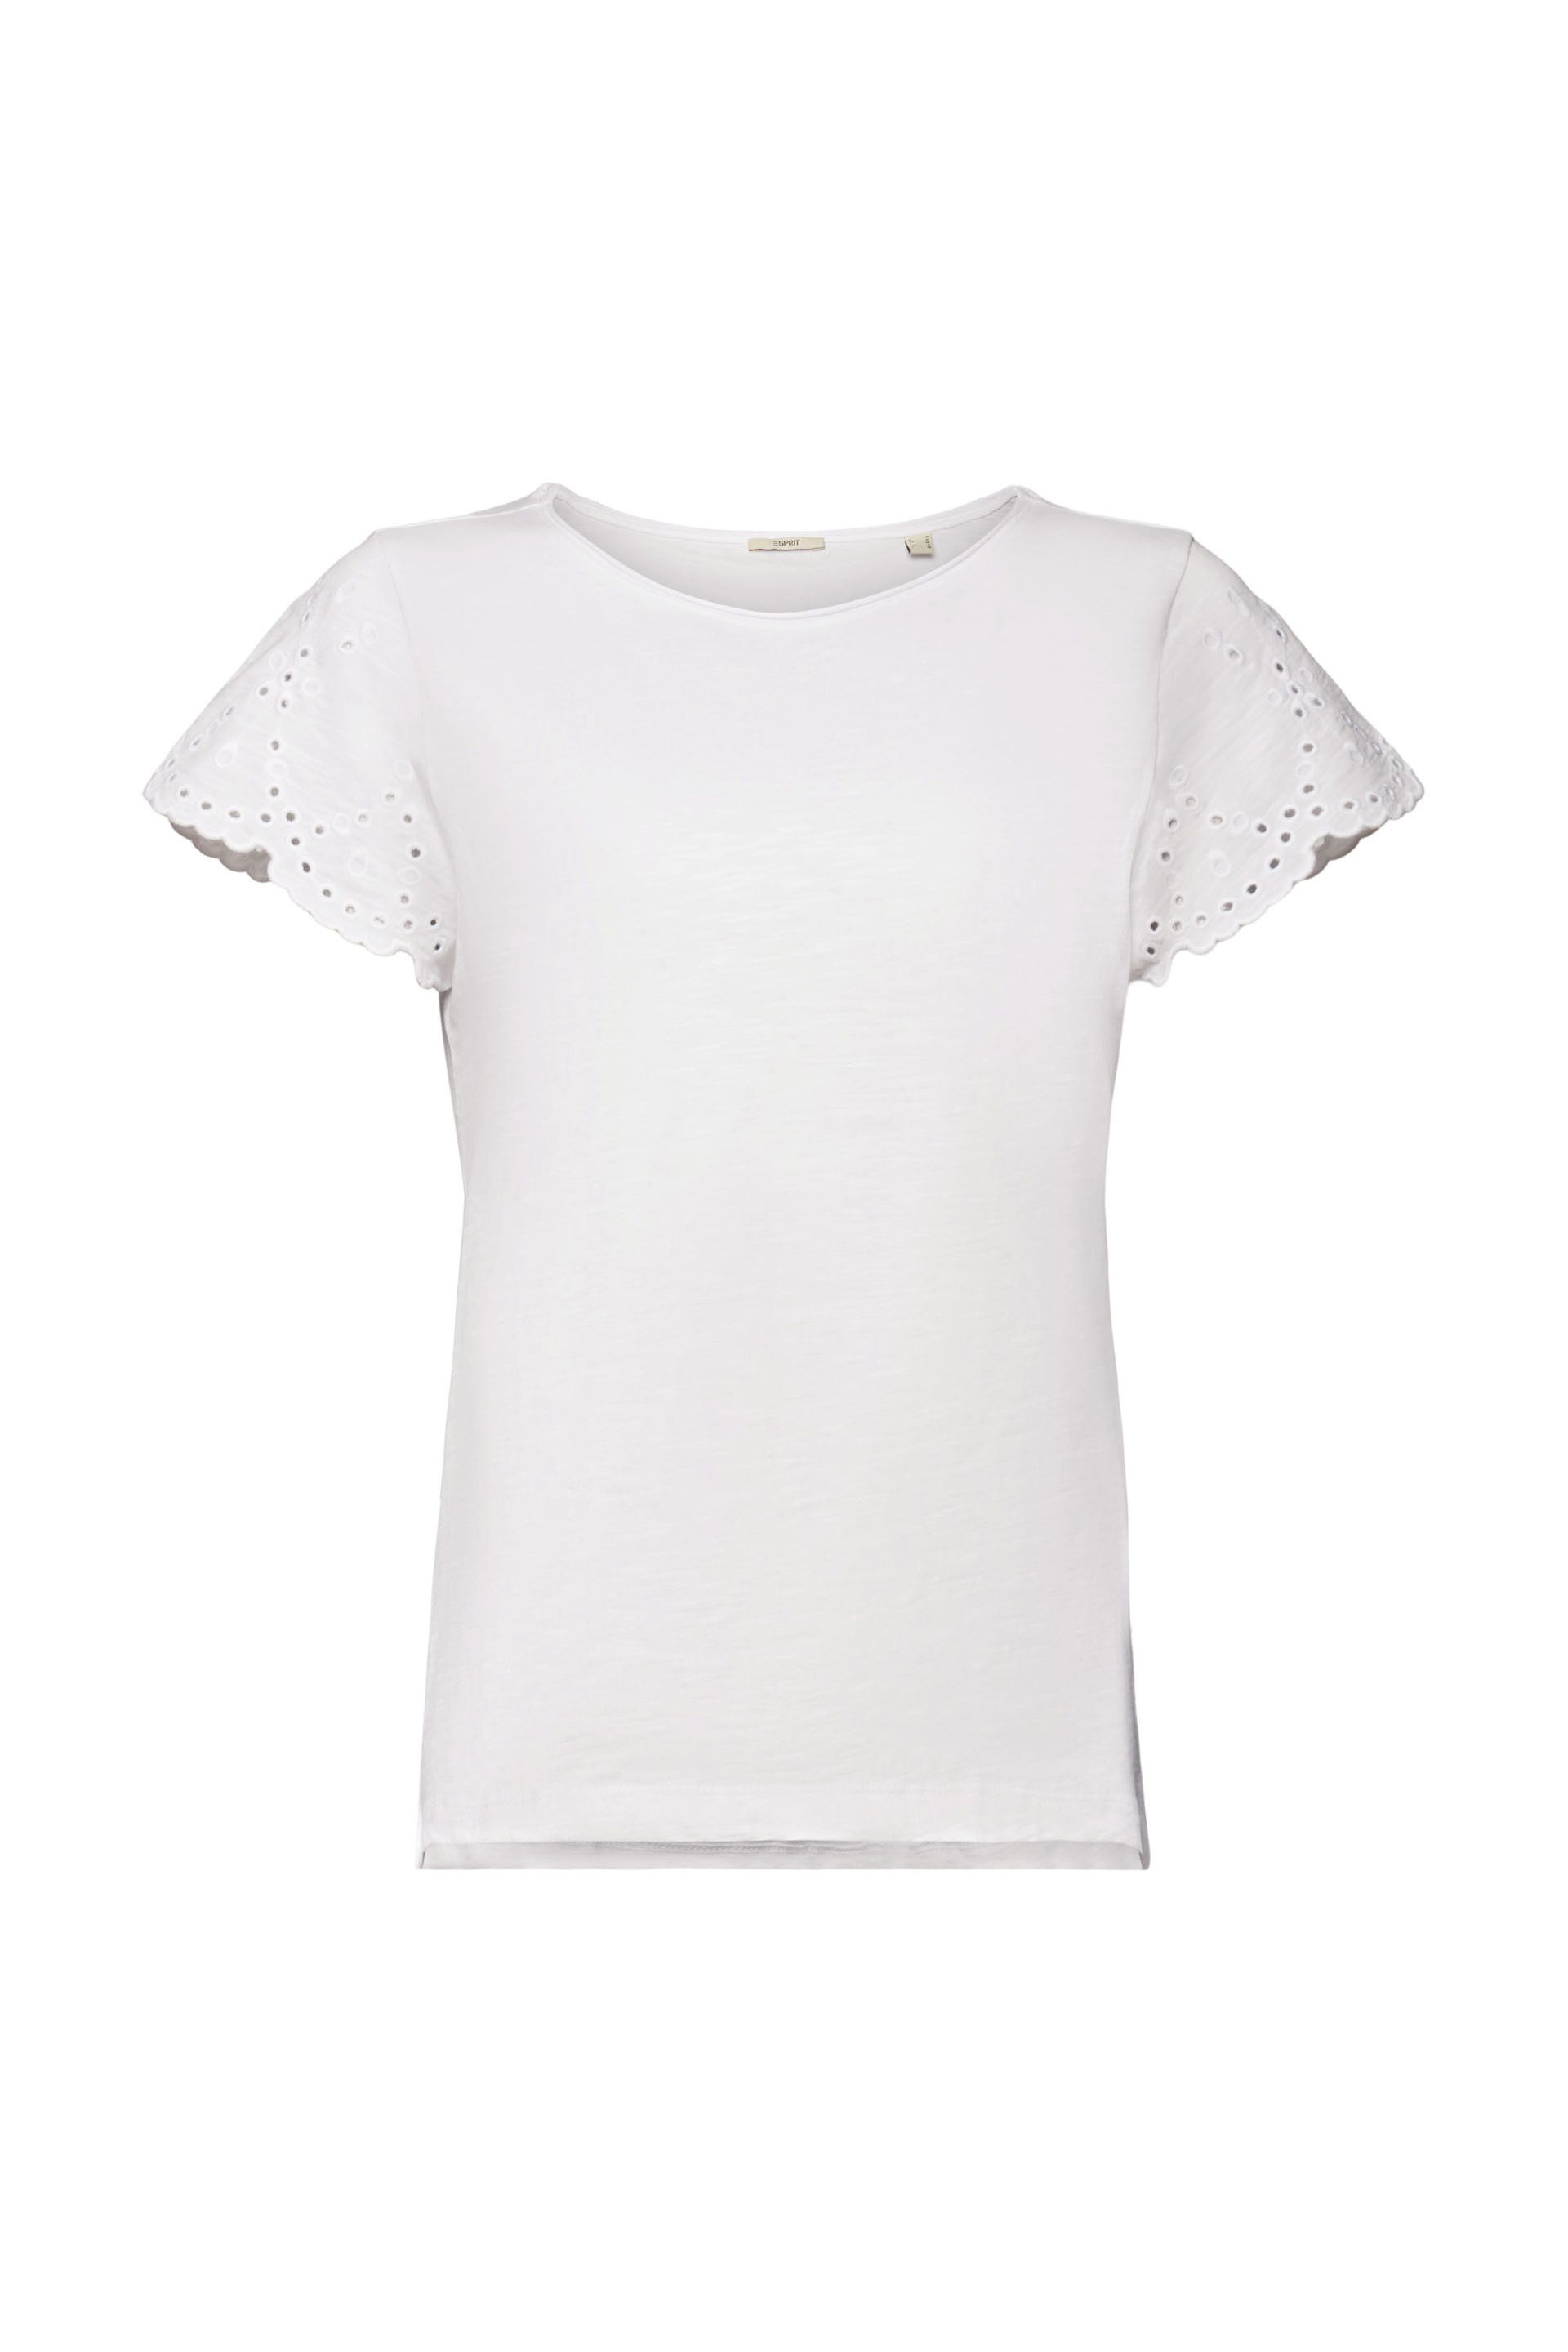 Esprit - T-shirt in cotone con ricami, Bianco, large image number 0